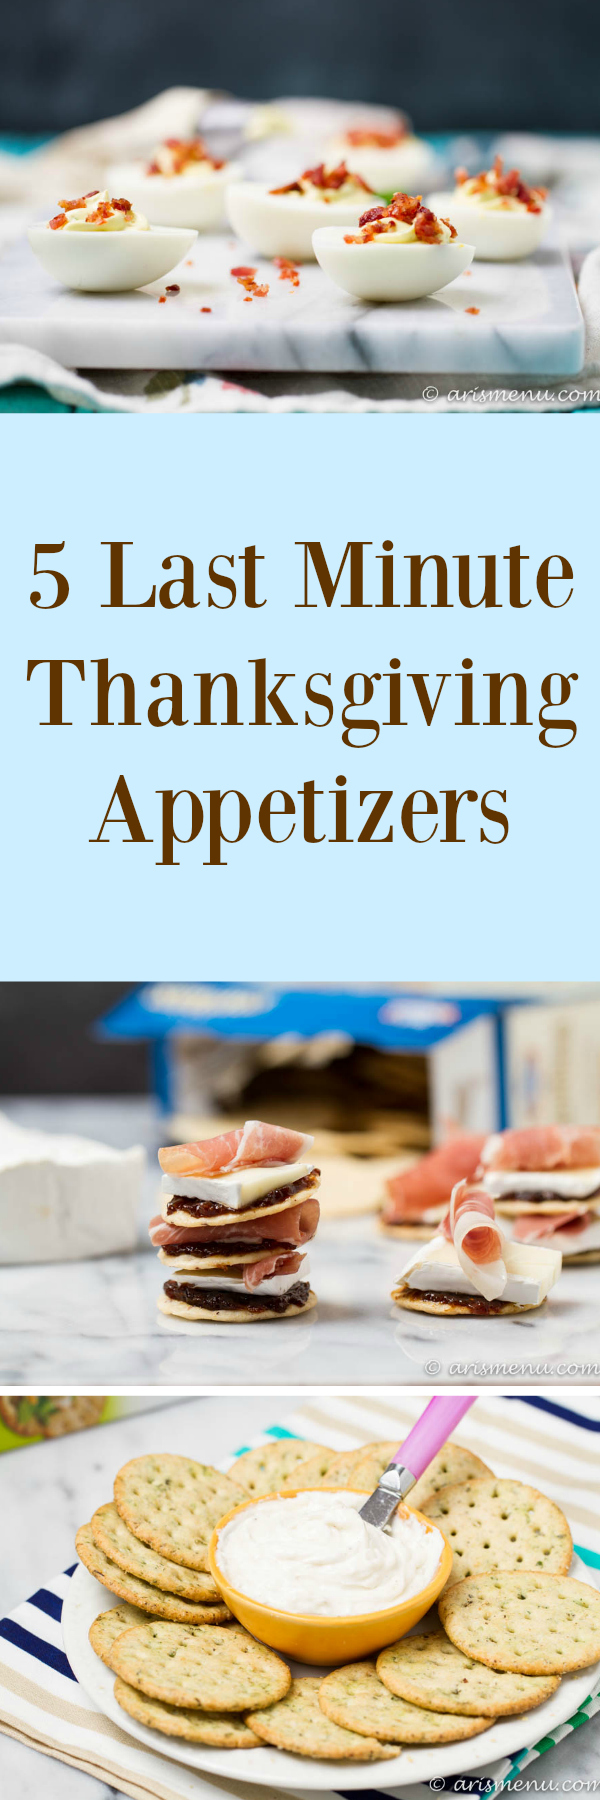 5 Last Minute Thanksgiving Appetizers: Perfect, easy appetizers to add to your Thanksgiving menu